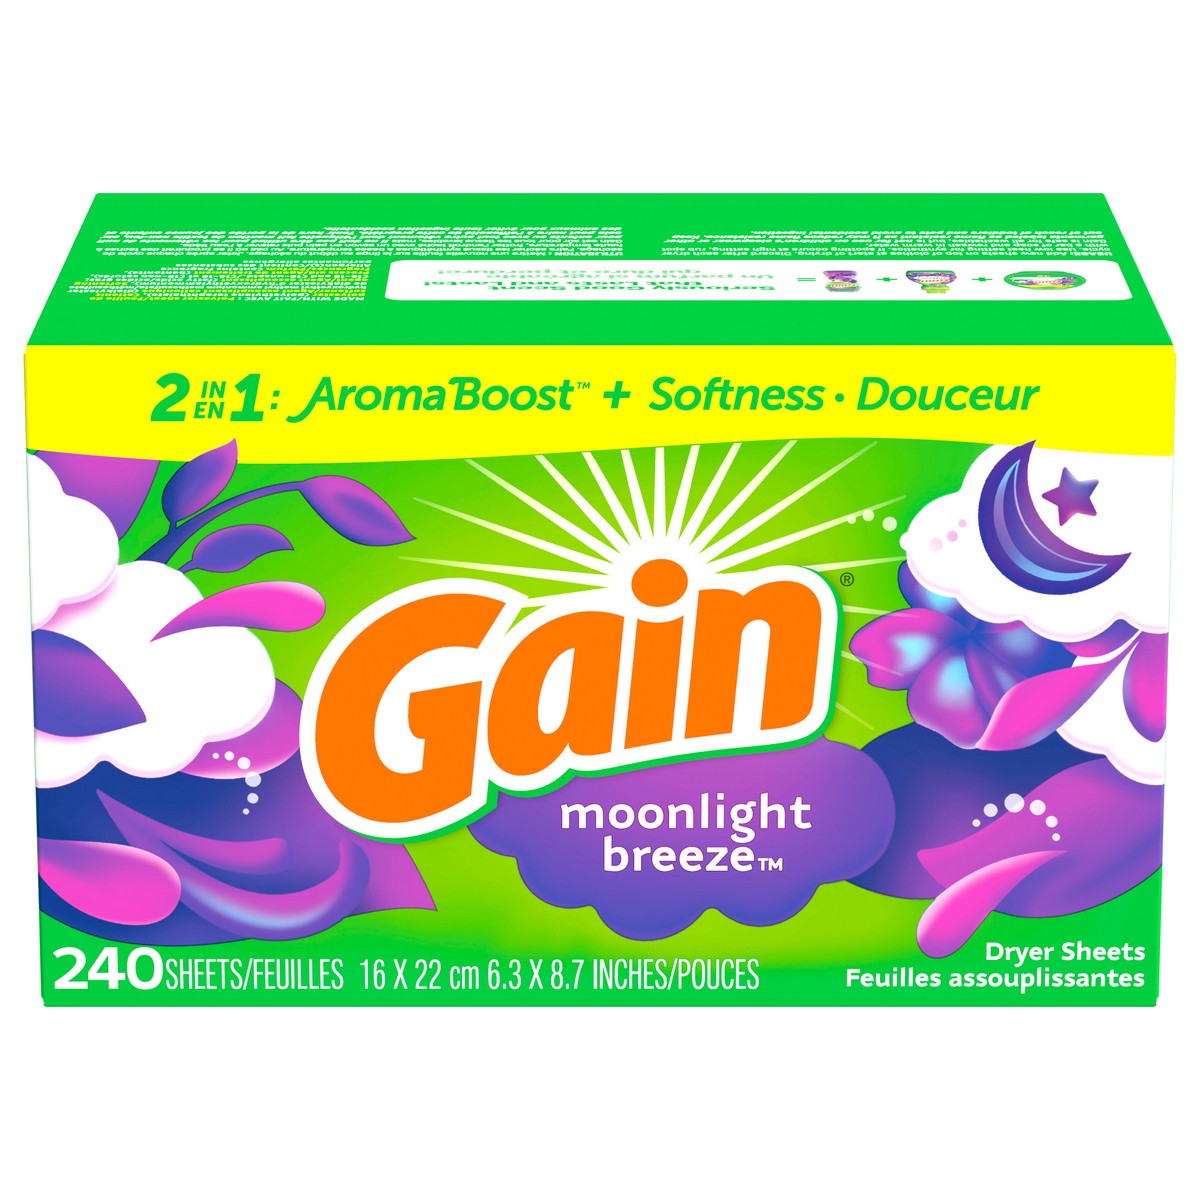 slide 4 of 12, Gain dryer sheets, 240 Count, Moonlight Breeze Scent Laundry Fabric Softener Sheets with 2-in-1 Aromaboost Plus Softness, 240 ct